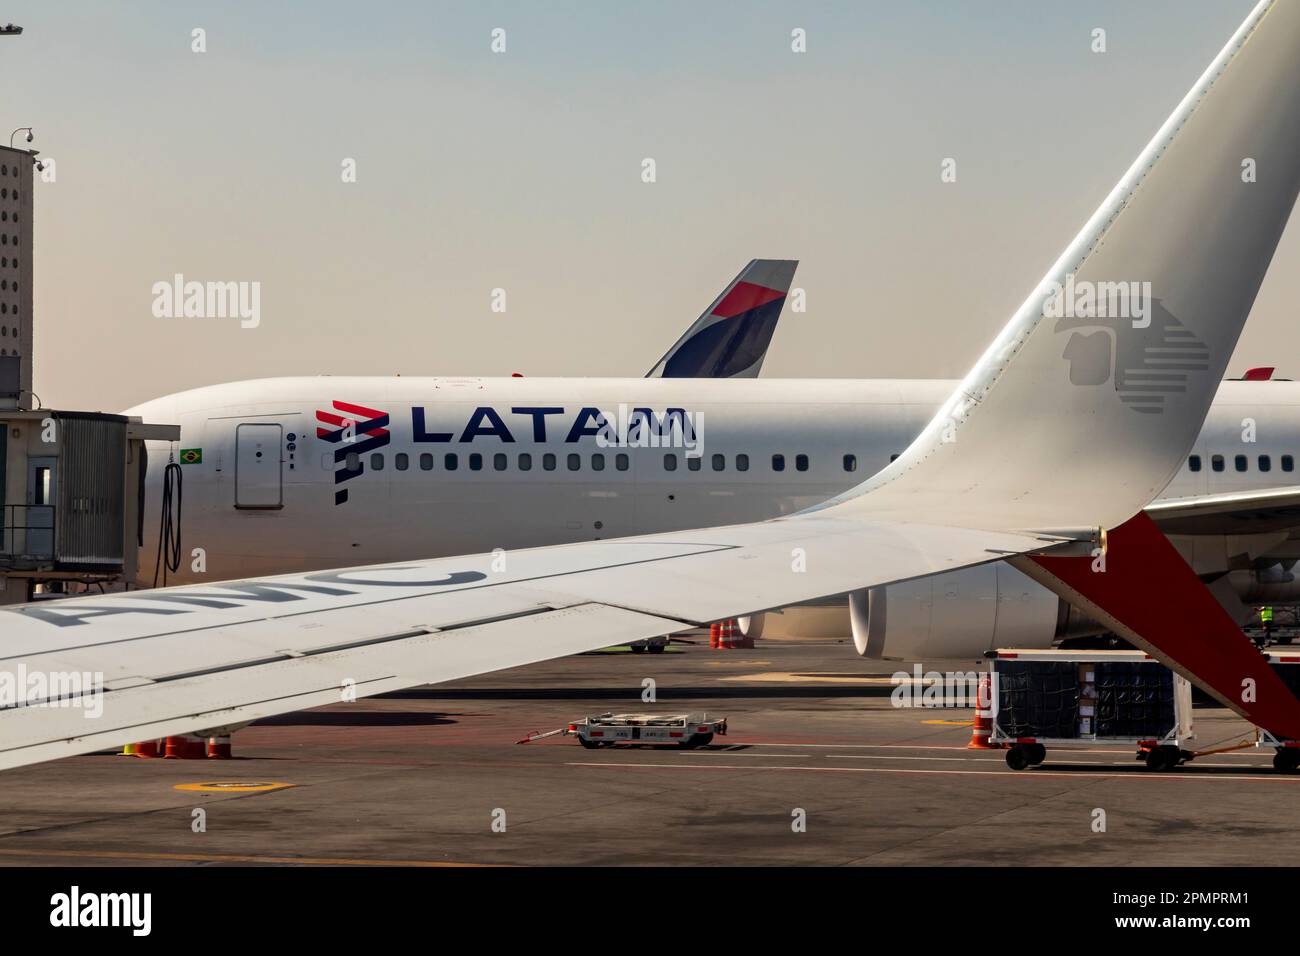 Mexico City, Mexico - A LATAM Airlines jet on the ground at  Mexico City International Airport (Aeropuerto Internacional Benito Juárez). Based in Chil Stock Photo